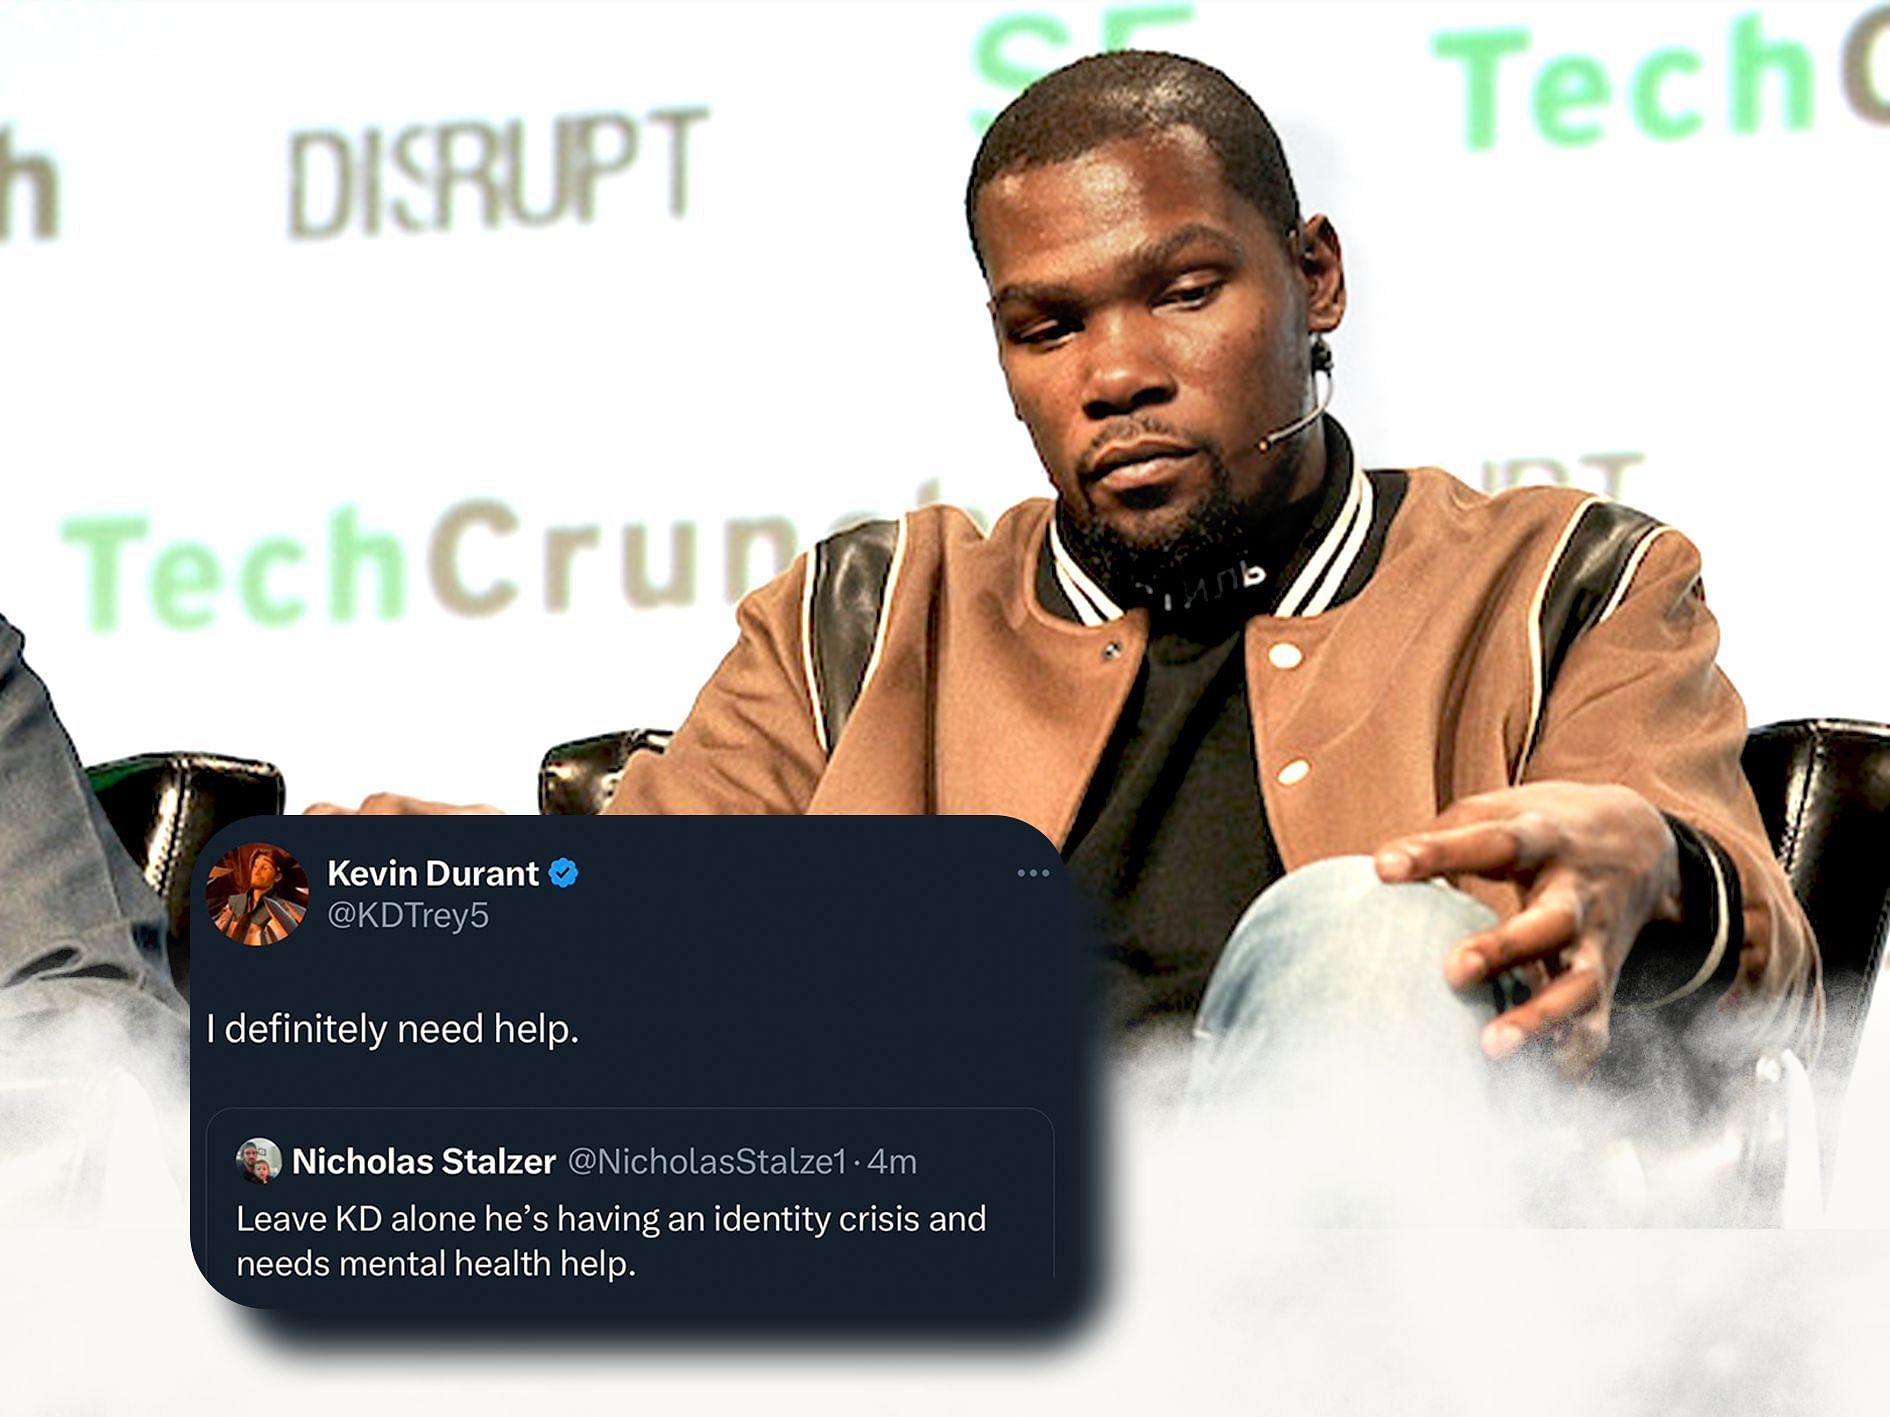 Kevin Durant tweeted and then deleted that he &quot;definitely need help.&quot;